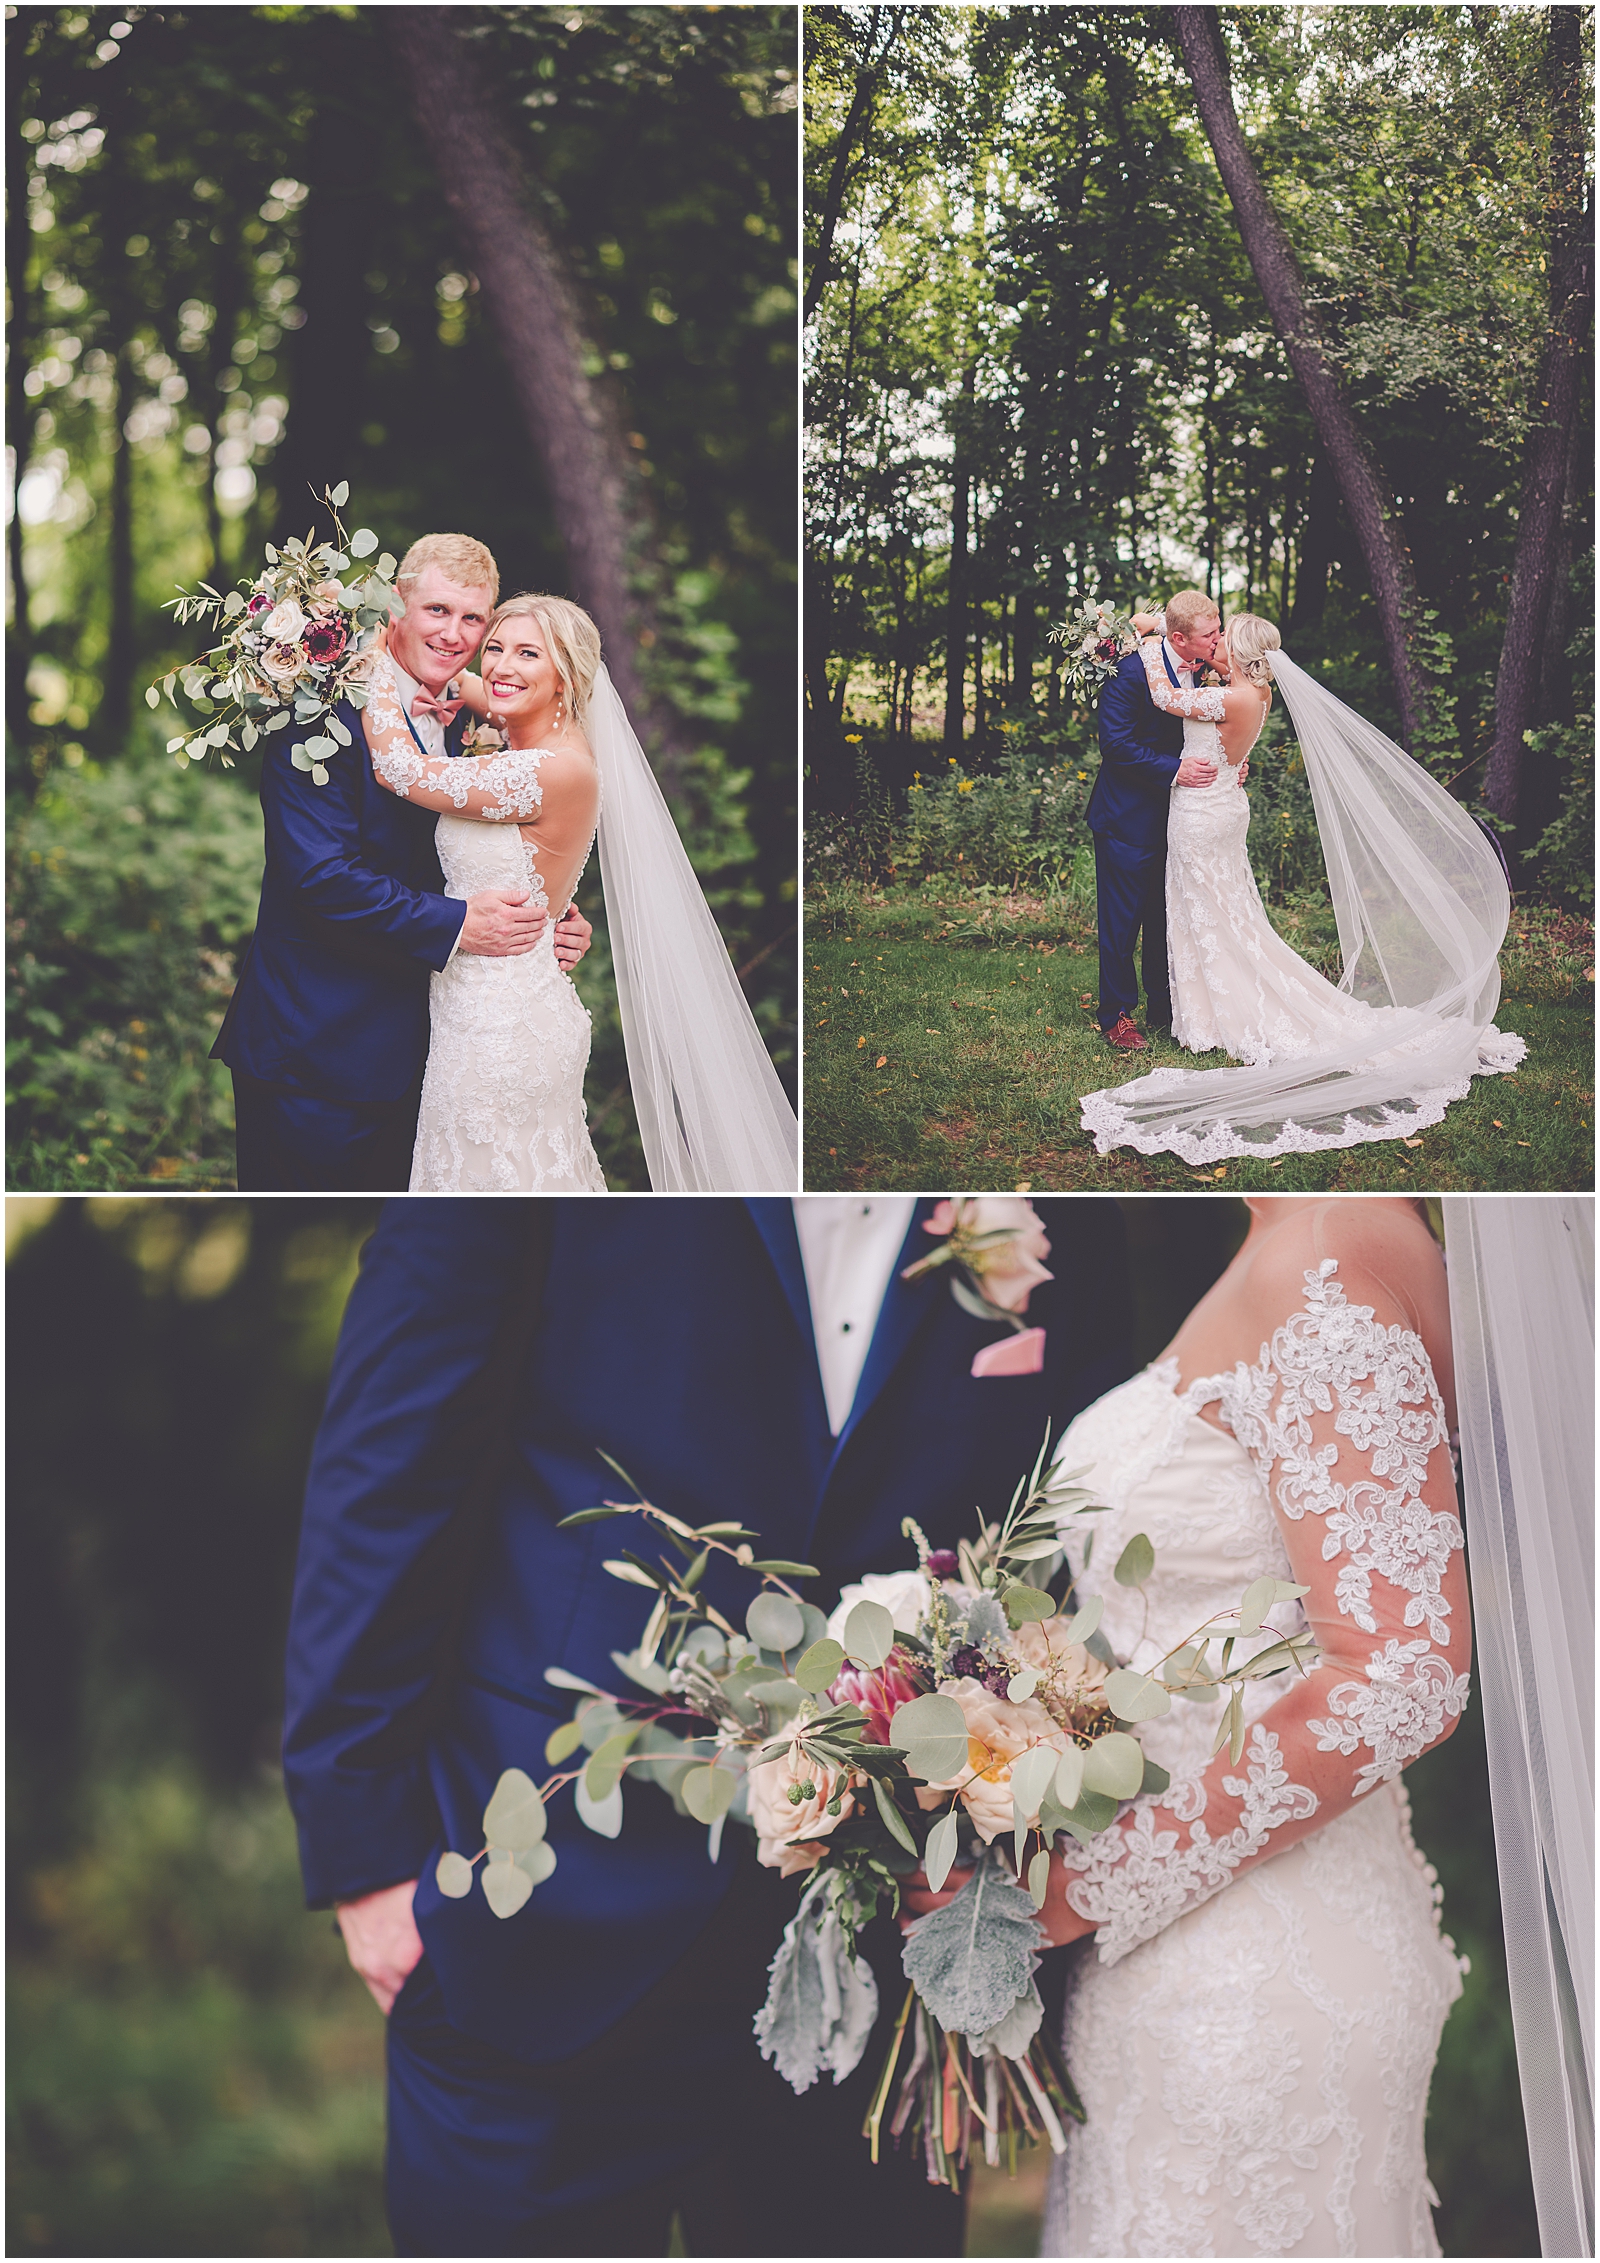 Jennifer and Brett's dusty rose and gold wedding day at The Barn at Hornbaker Gardens with Chicagoland wedding photographer Kara Evans Photographer.